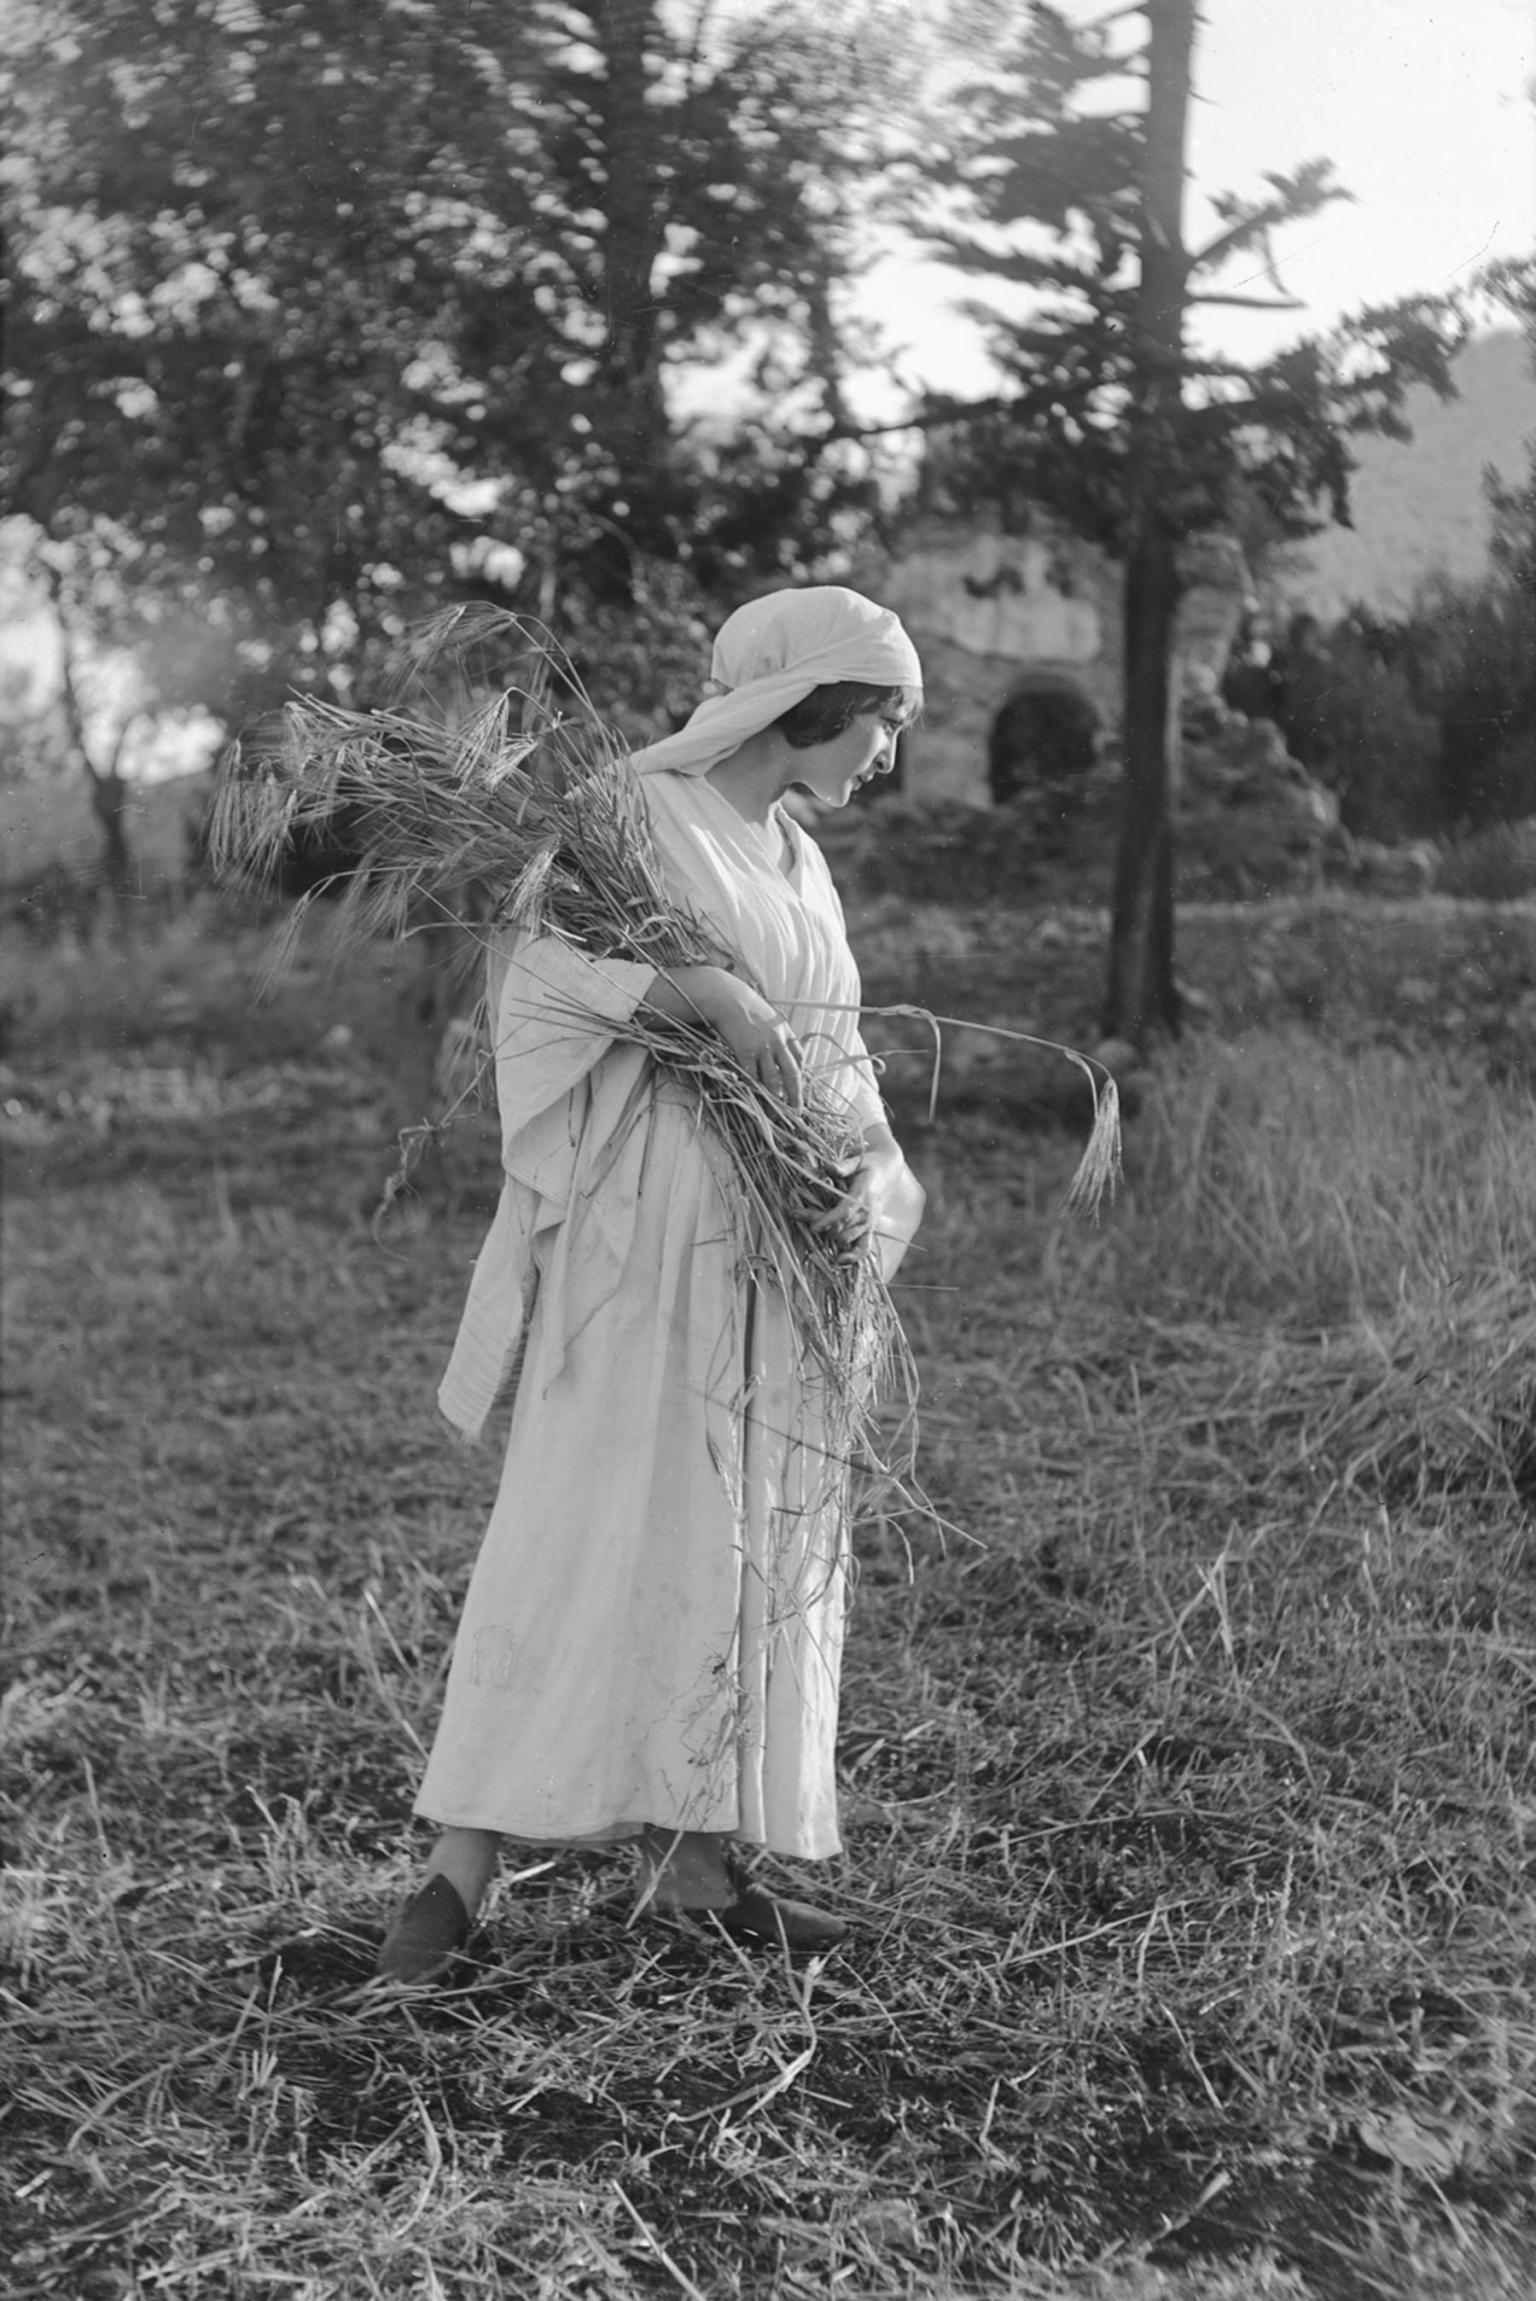 Photograph of woman wearing white head scarf holding a bouquet and gazing downward in a field.